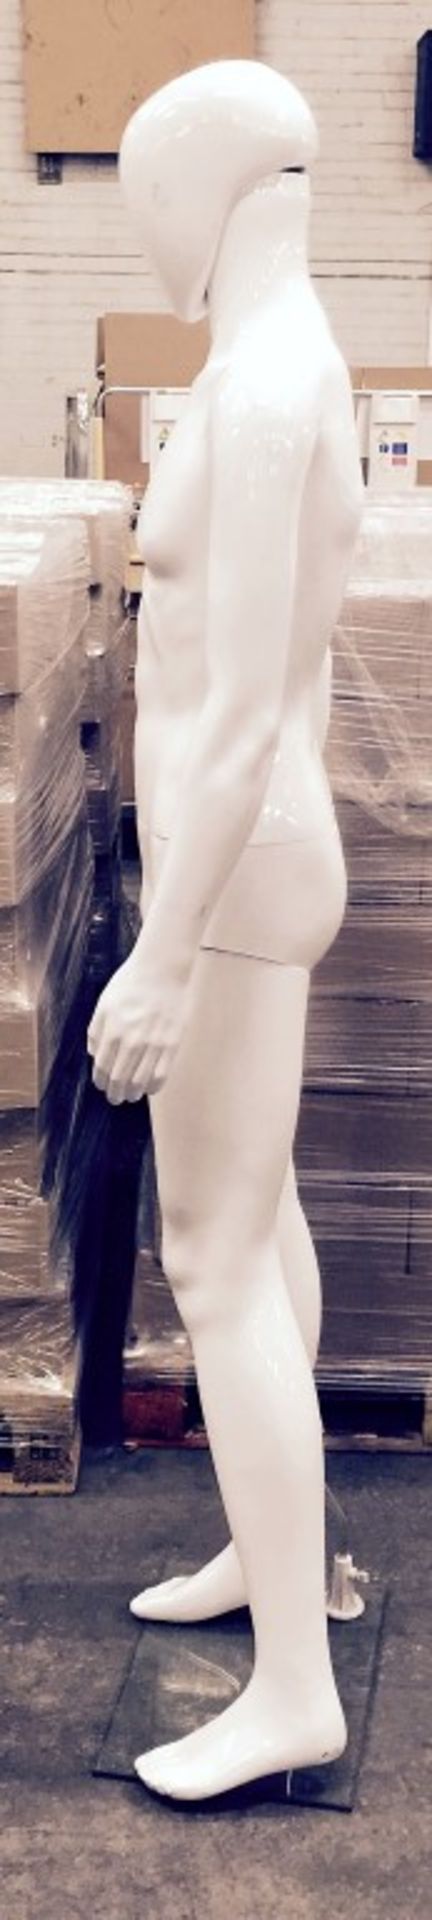 1 x Male Full Body Mannequin – Life Size Faceless Adult Form With Adjustable Head and Arms – White - Image 2 of 4